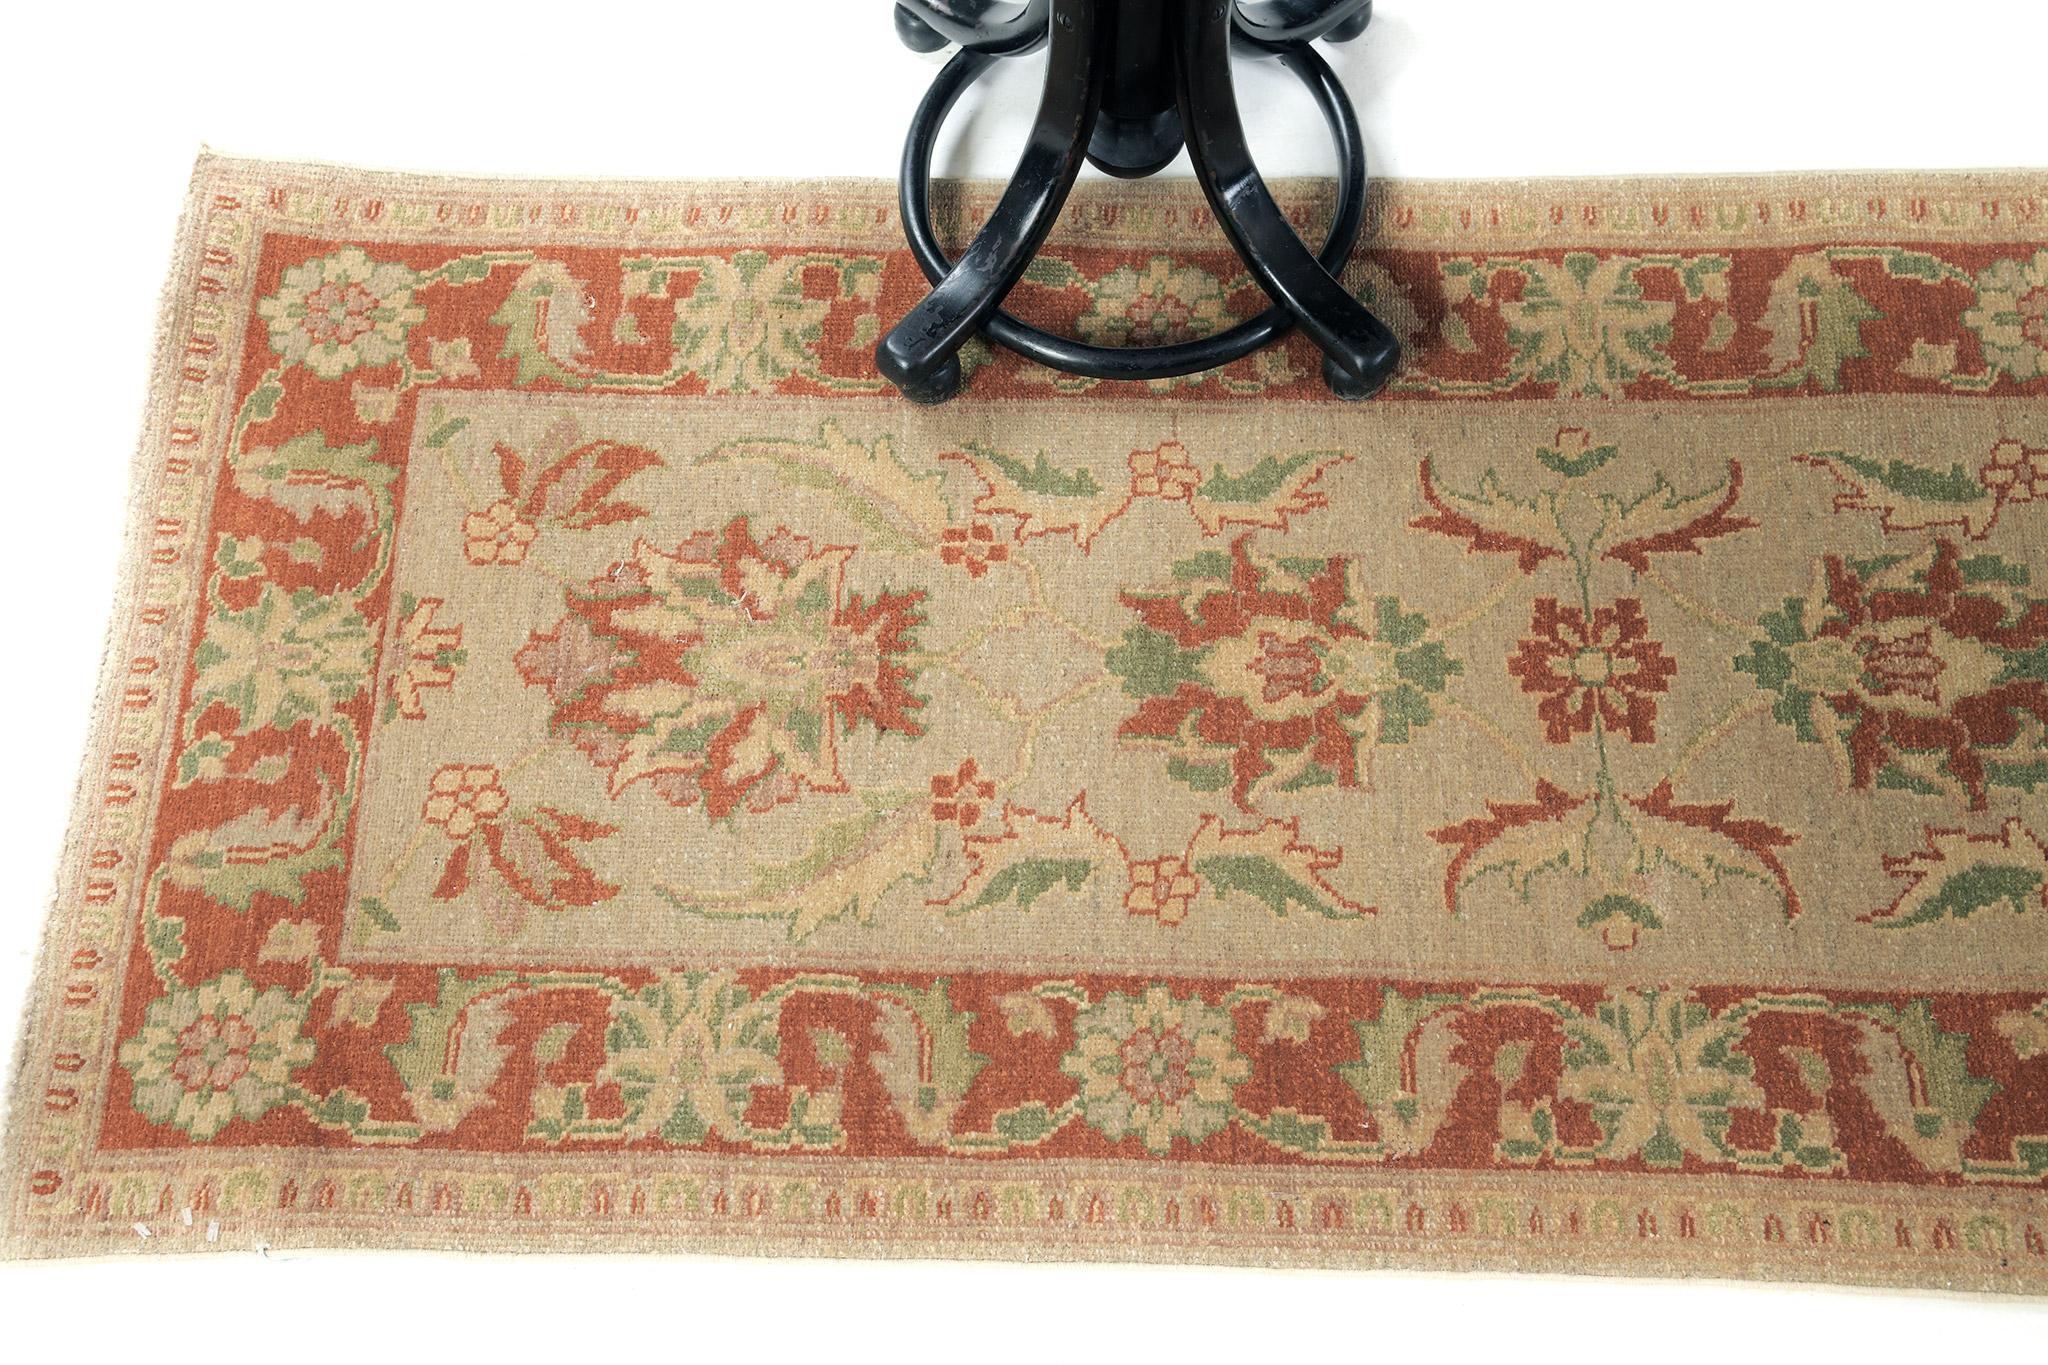 This mesmerizing Sultanabad Runner has patterns of peonies that make the rug impressive. It makes your interior more fascinating. Neutral tones feature even the smallest details of the patterns and motifs that match with the a camel backdrop. It